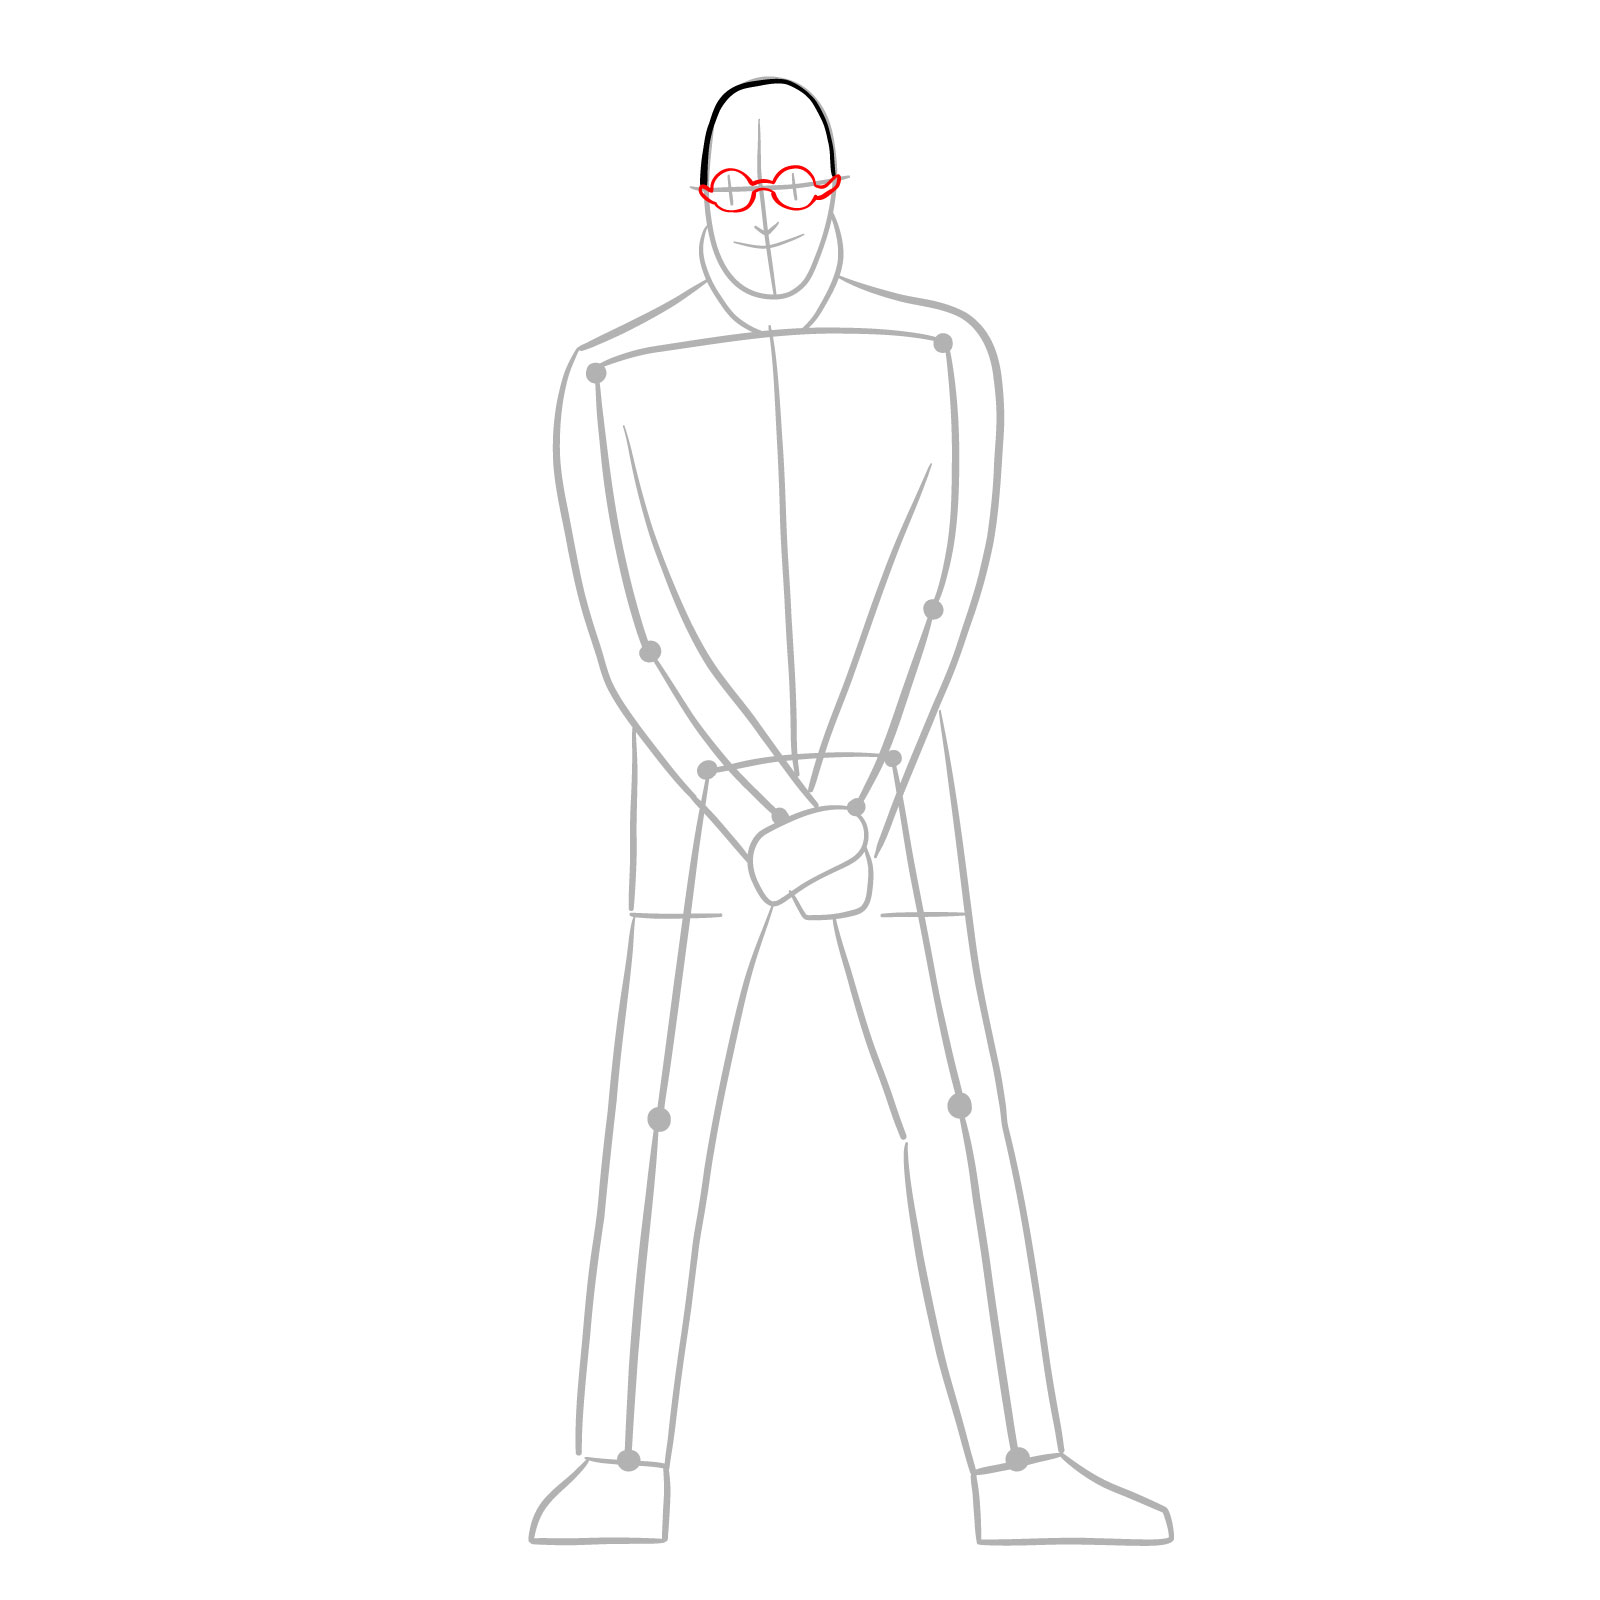 How to draw Dr. Hugo Strange from DC Comics - step 05